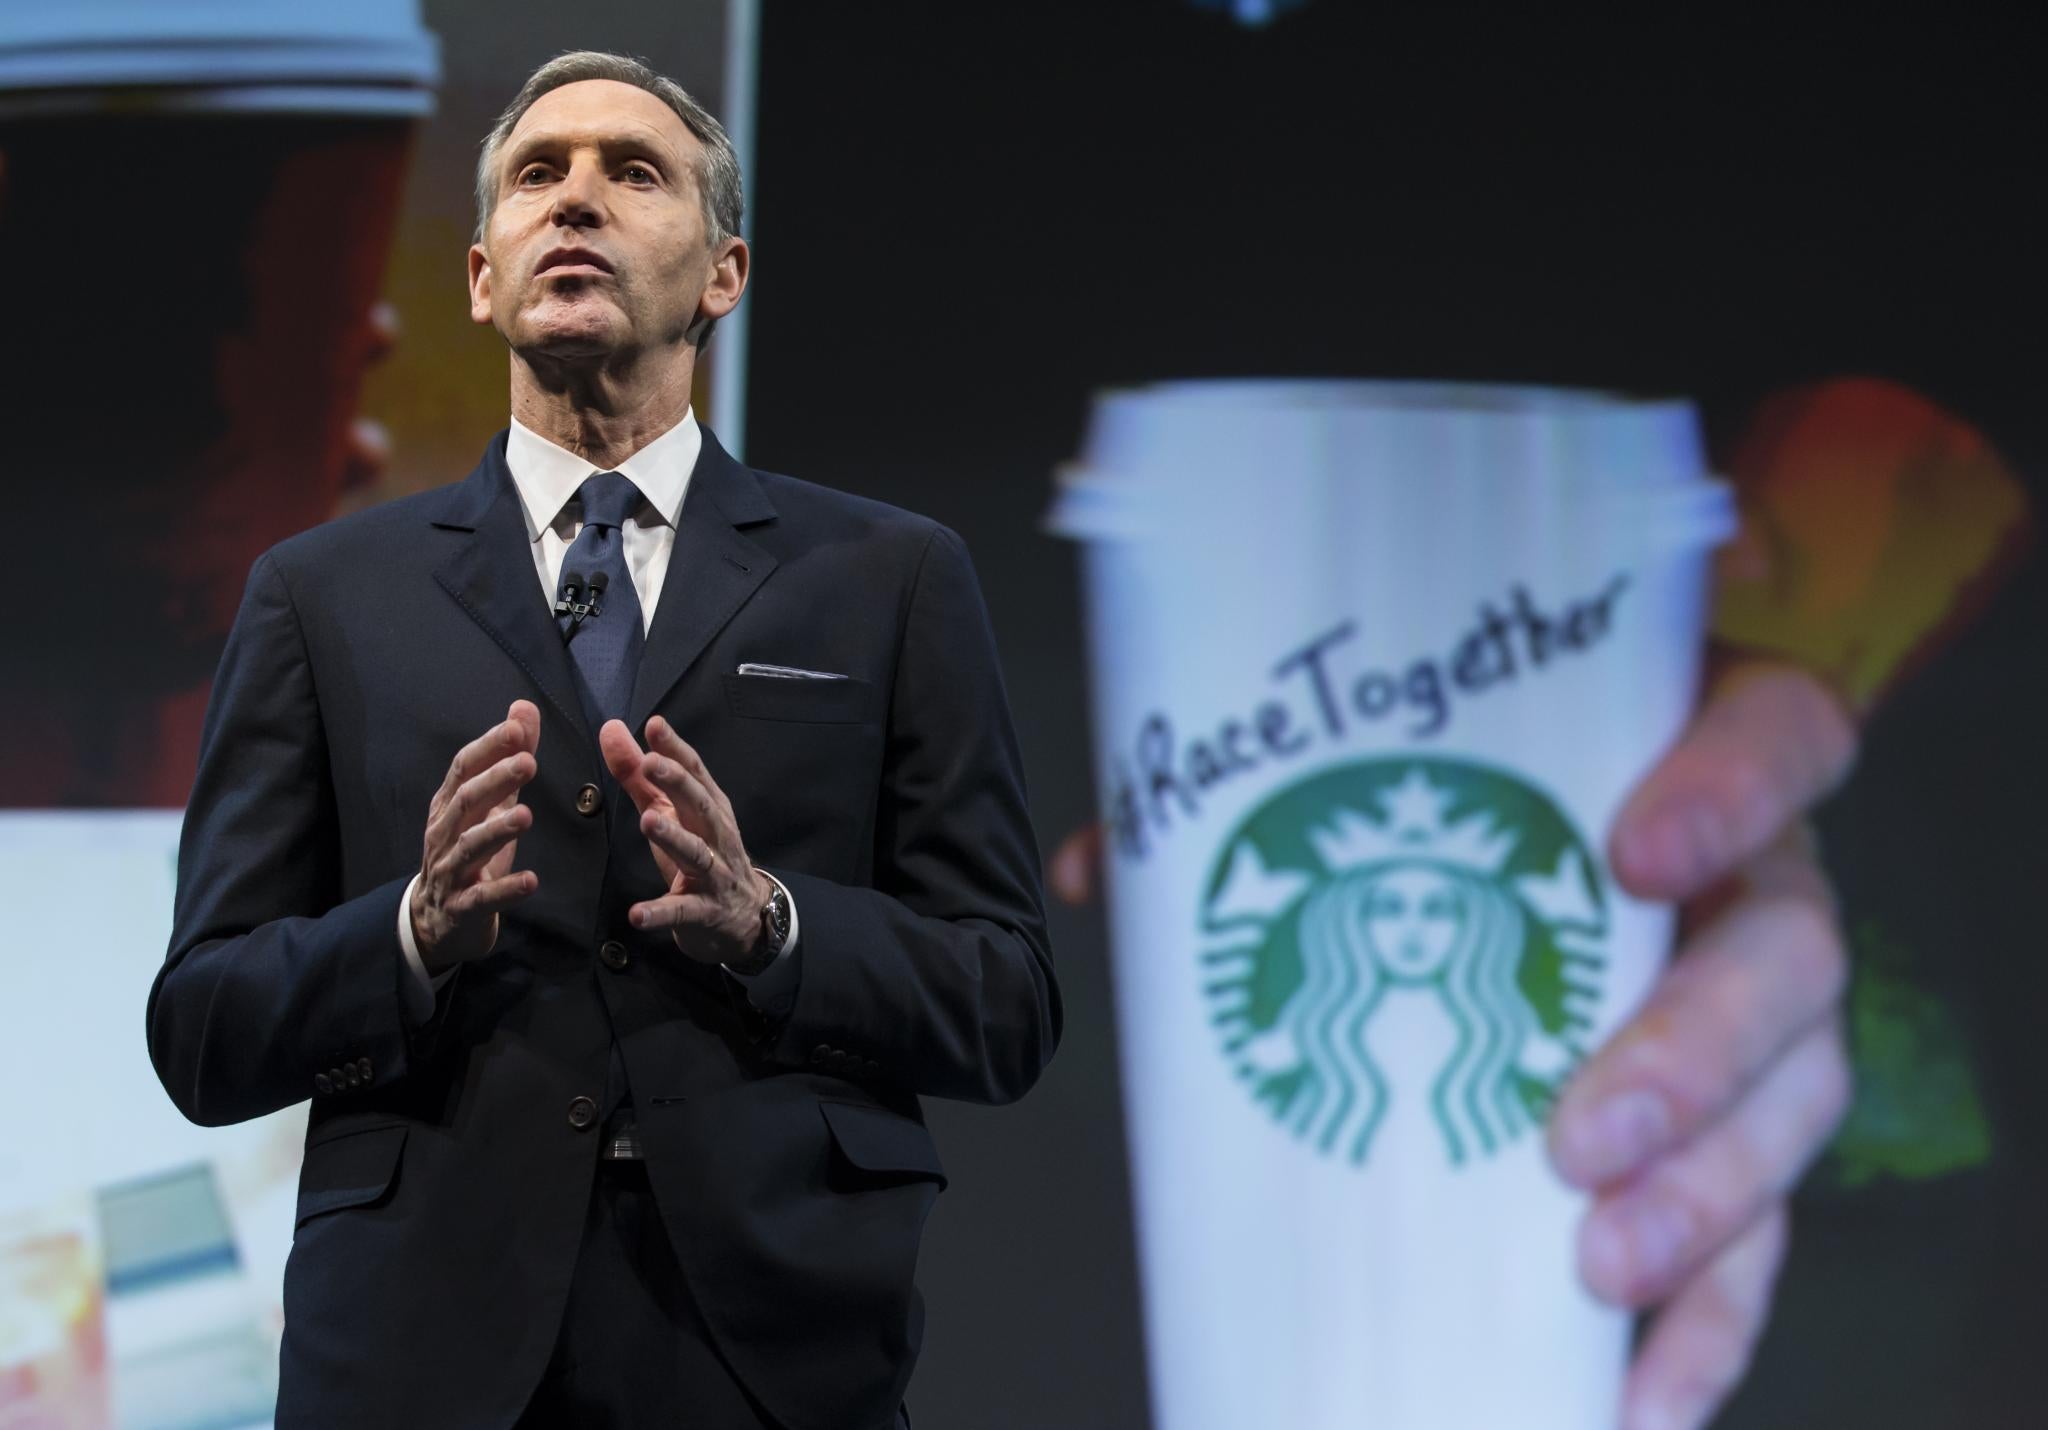 What Did You Think About Starbucks' 'Race Together' Campaign?